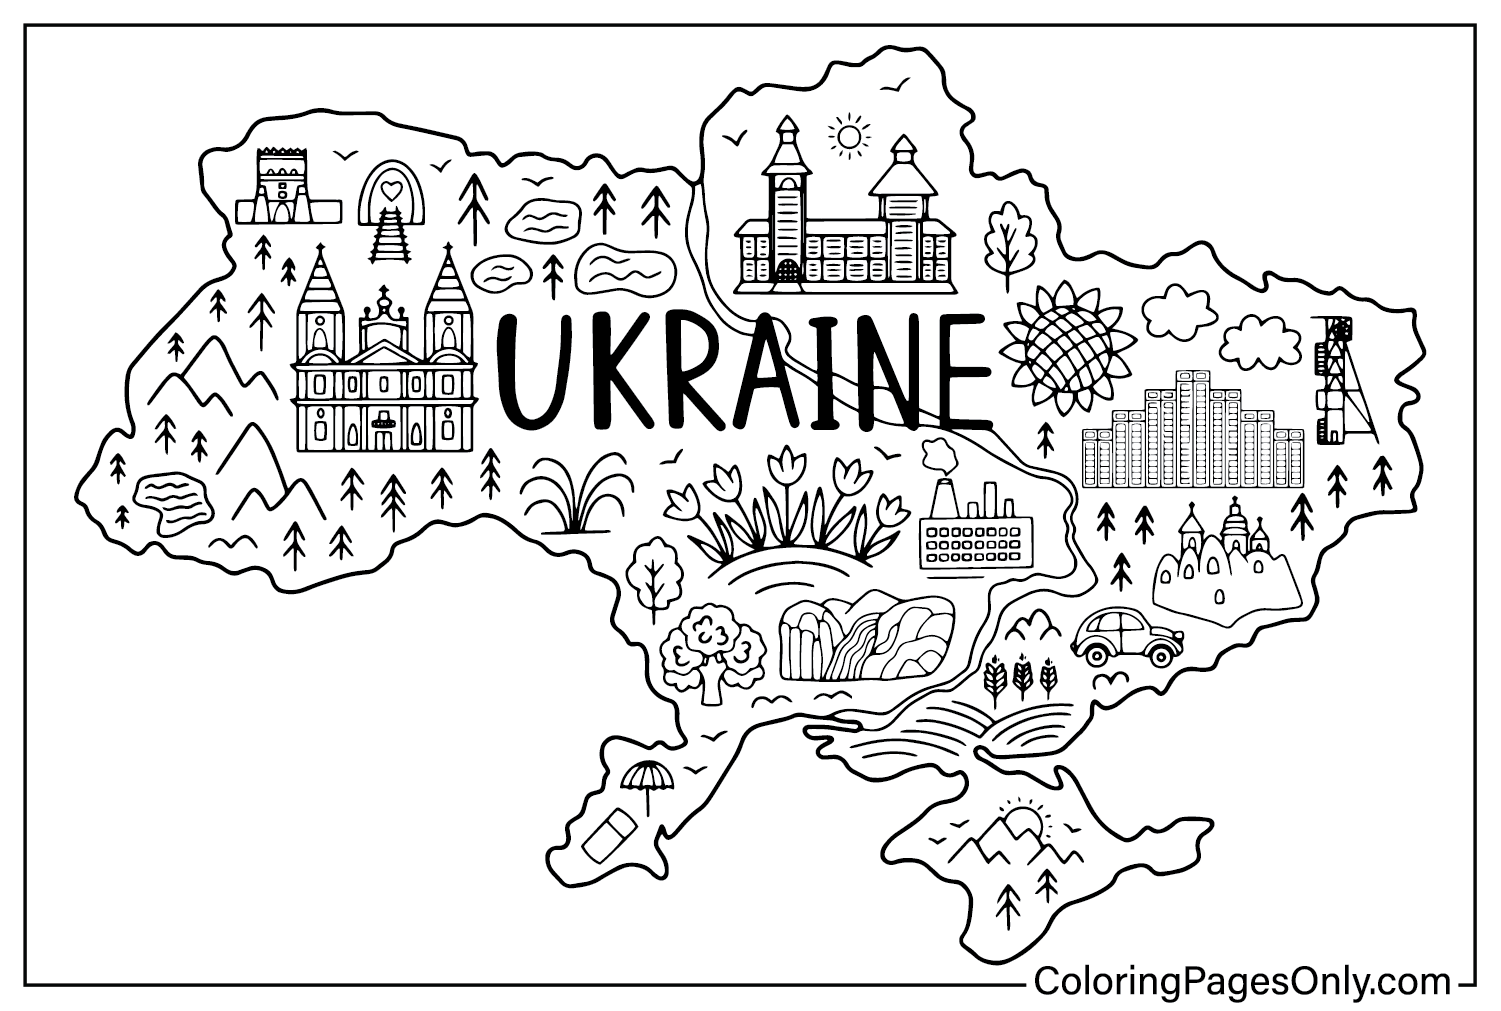 Map Ukraine Coloring Page from Ukraine